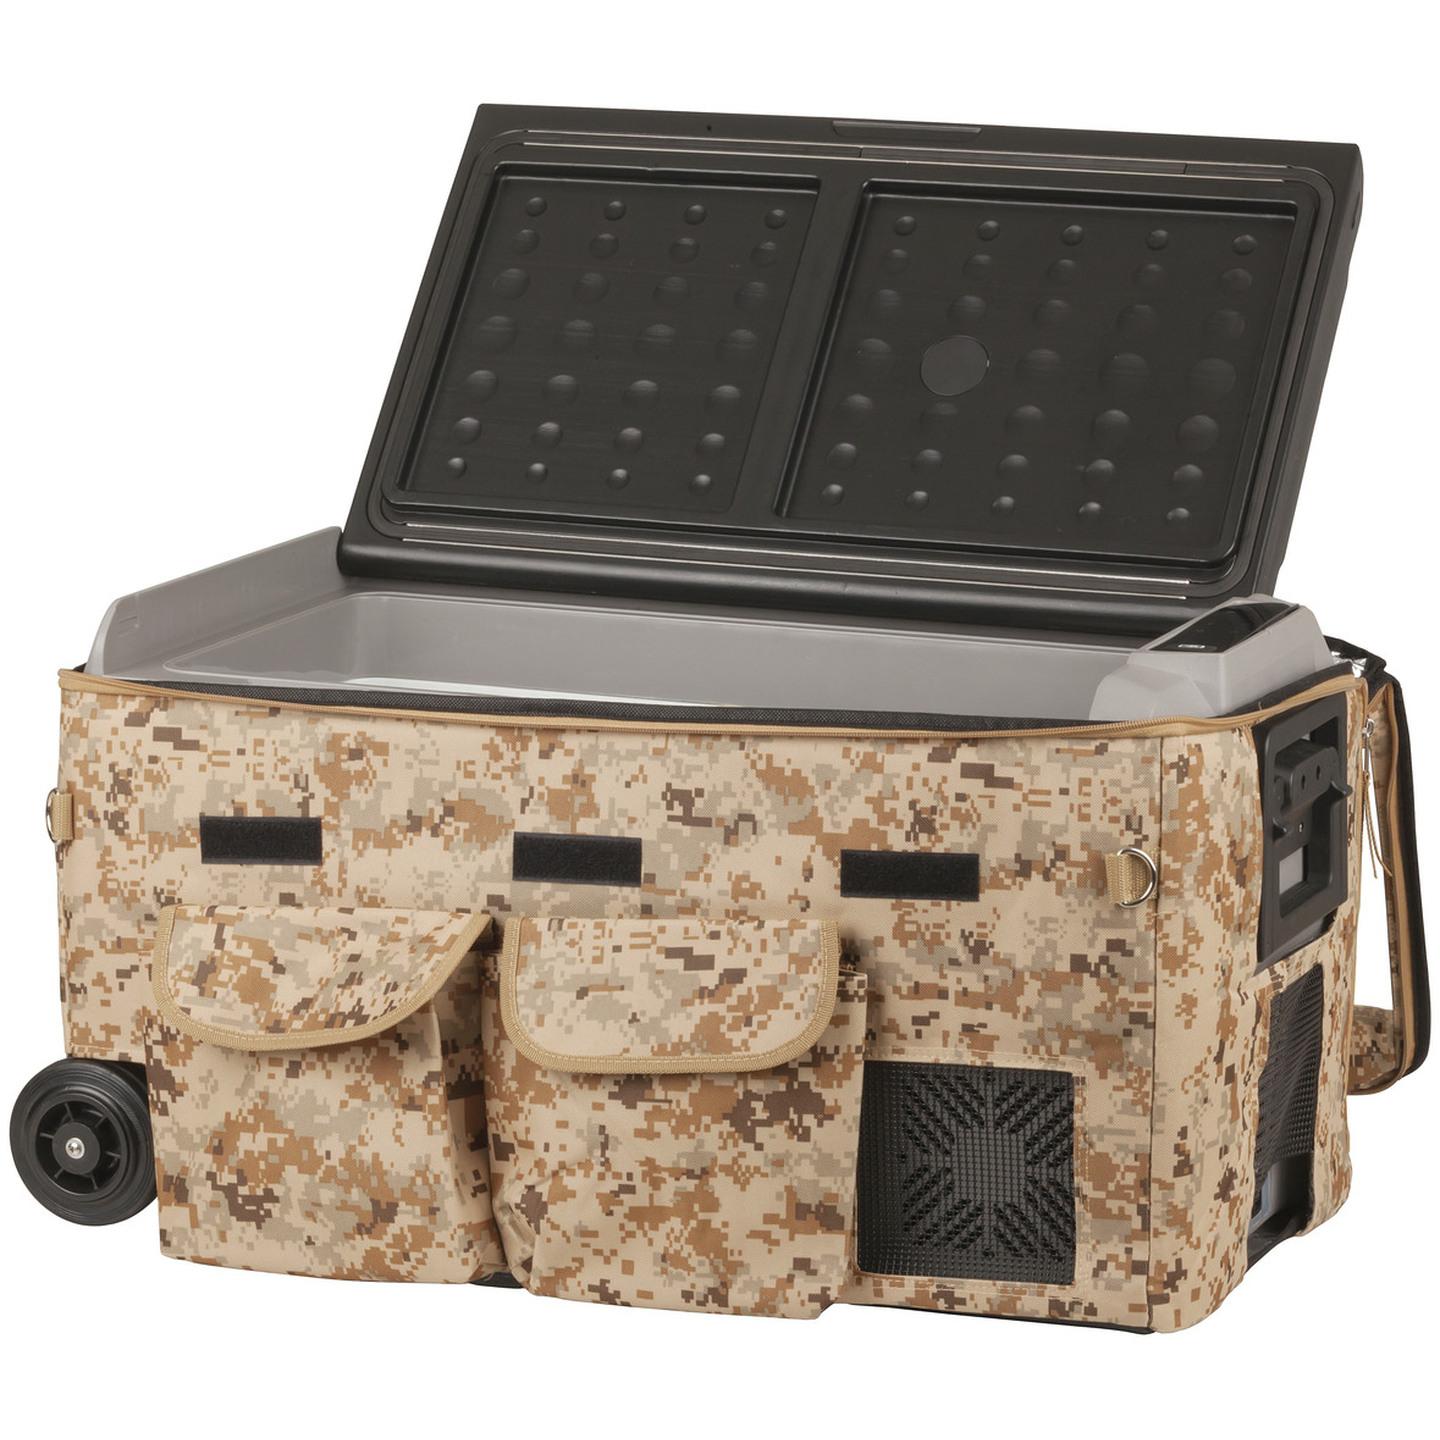 Camouflage Print Insulated Cover for 36L Brass Monkey Portable Fridge/Freezer